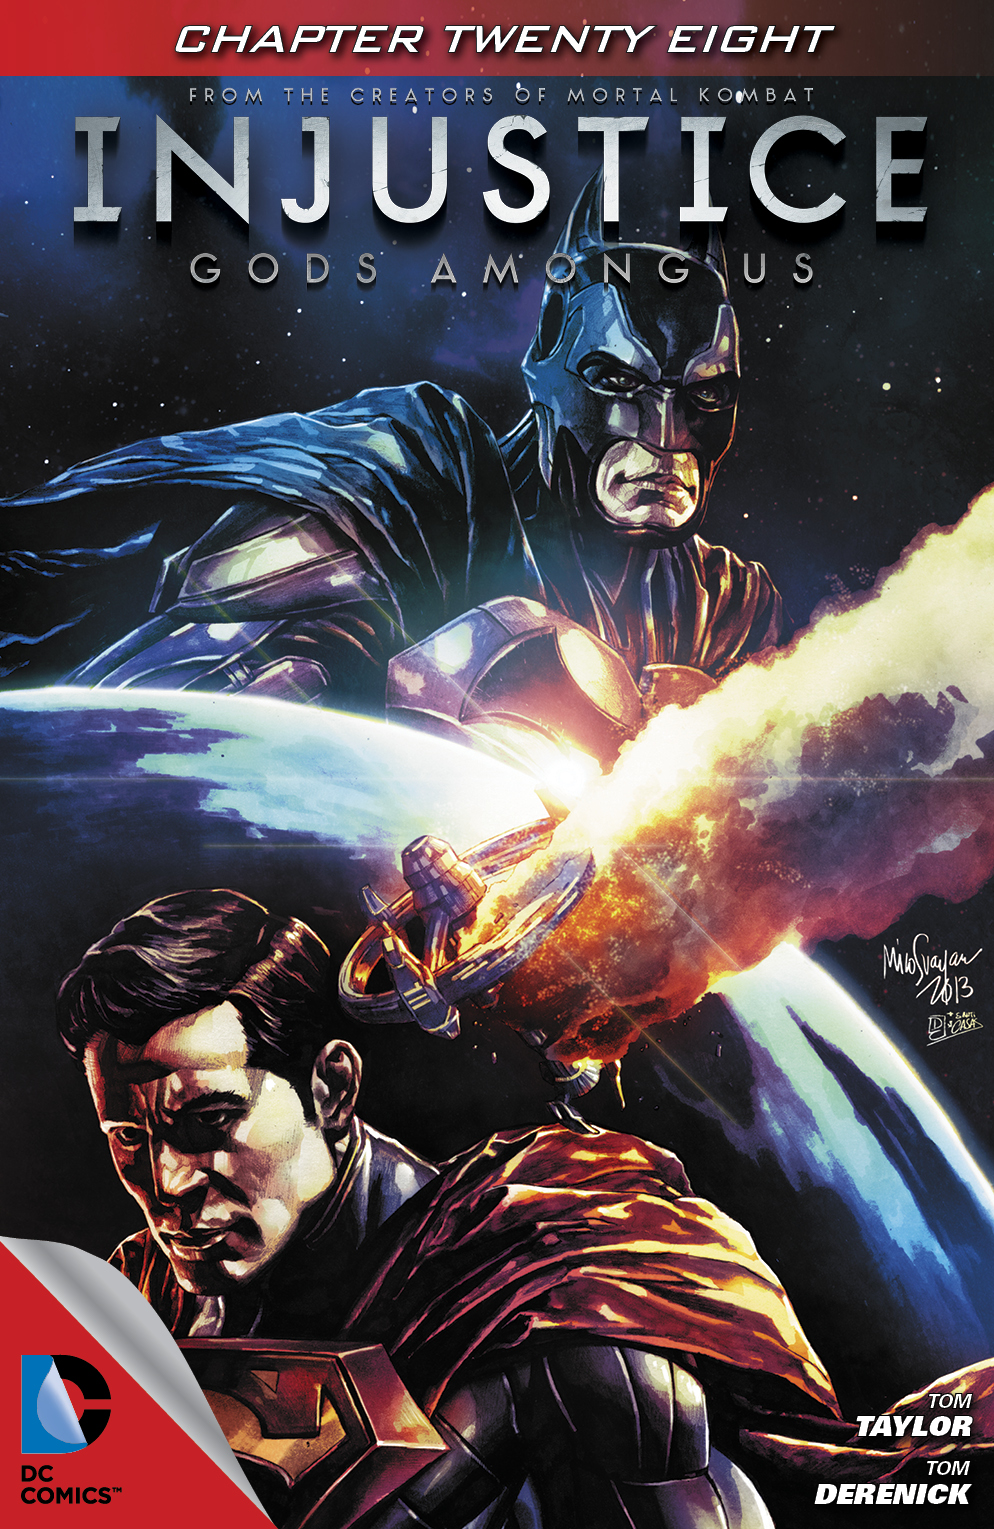 Injustice: Gods Among Us #28 preview images